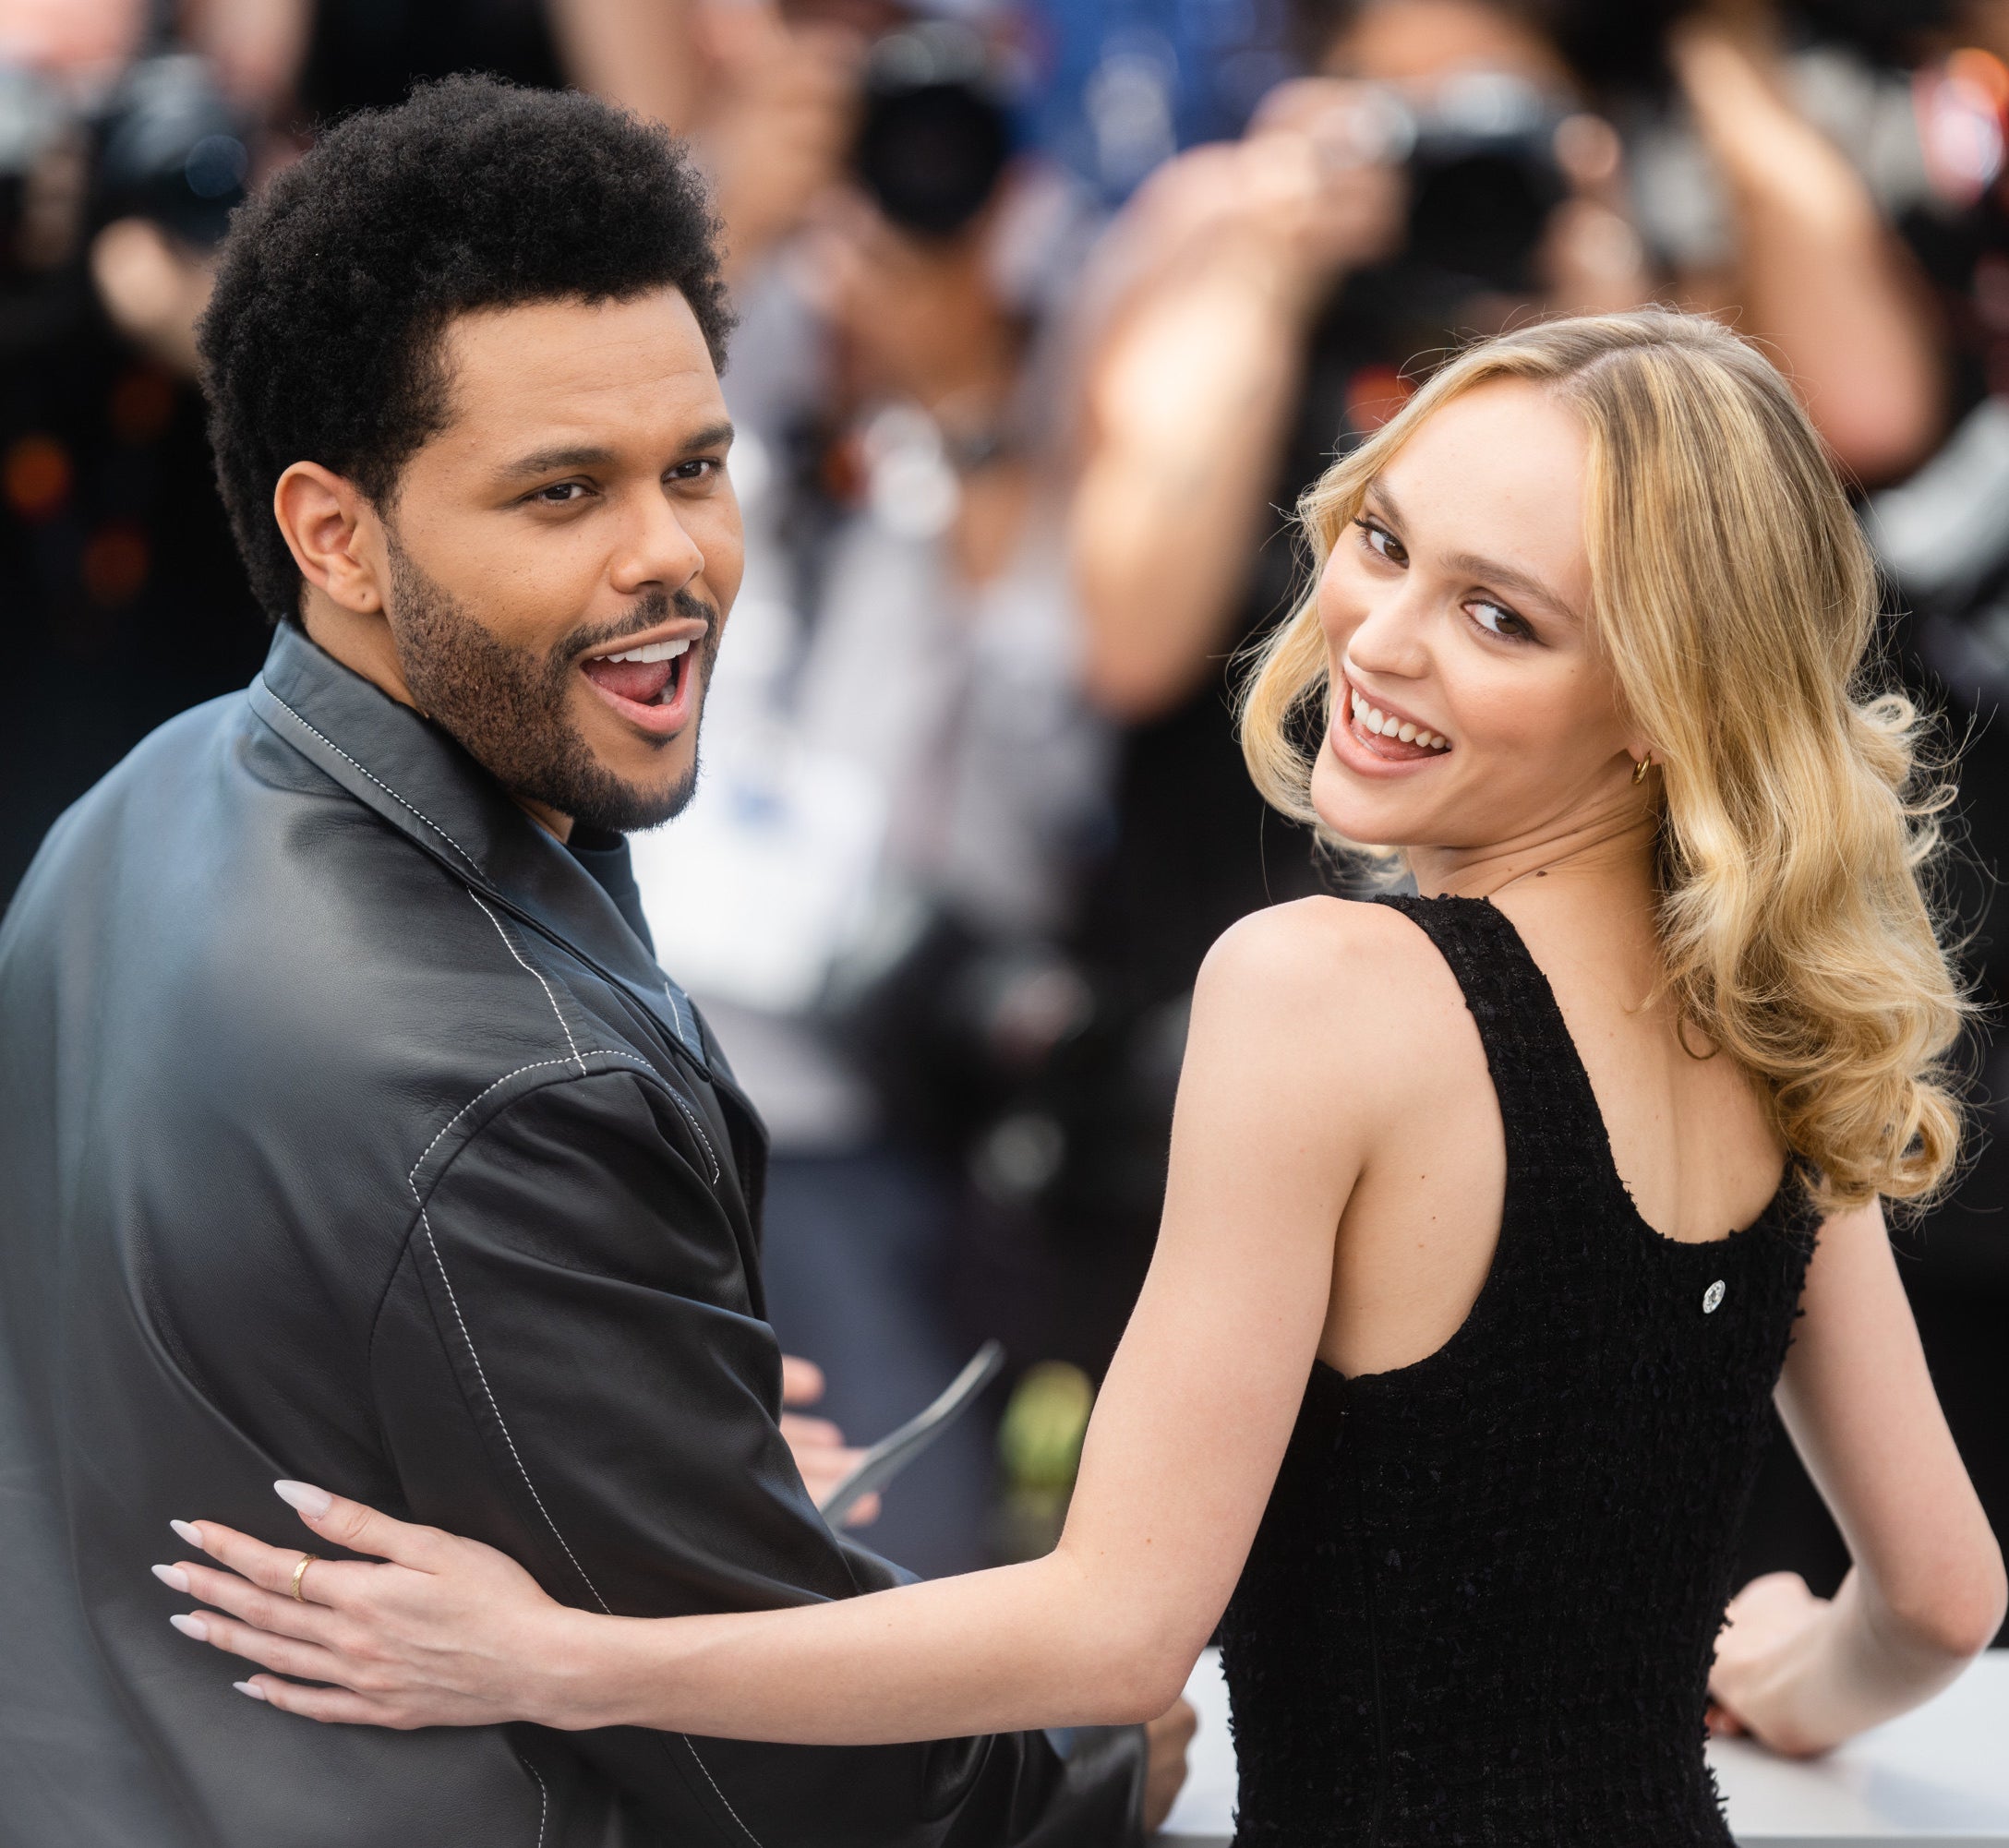 Abel and Lily-Rose smiling in Cannes